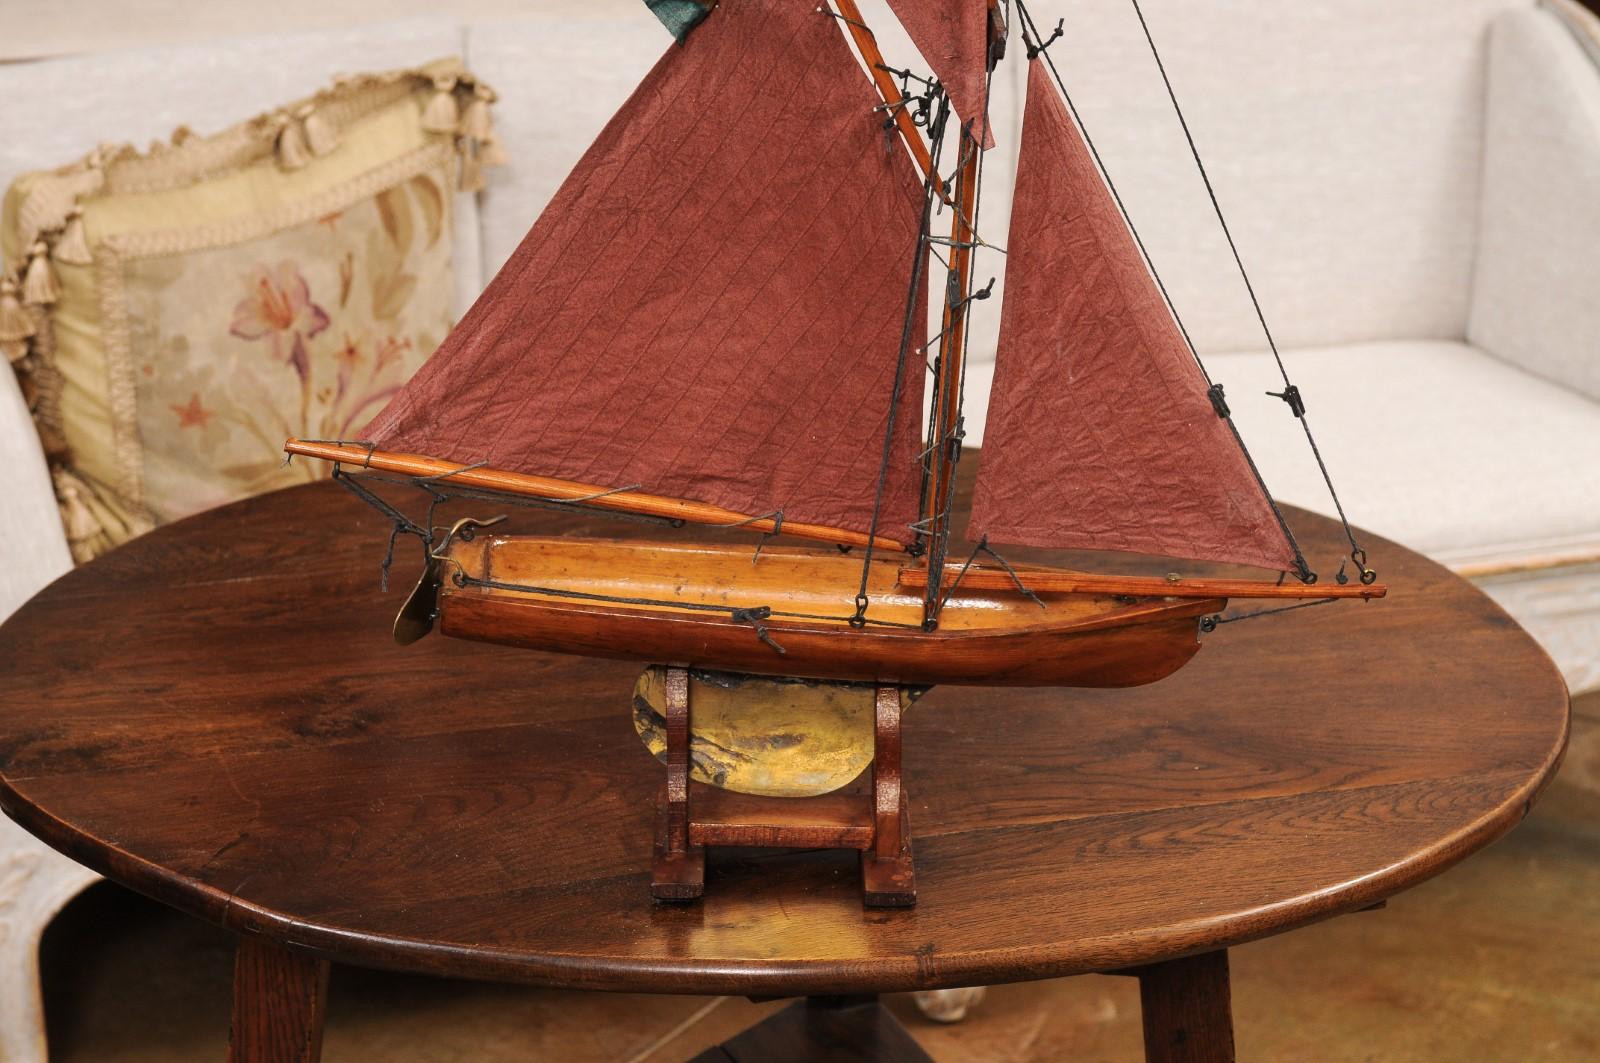 20th Century English 1920s George V Period Gaff Cutter Pond Yacht with Red Sails For Sale